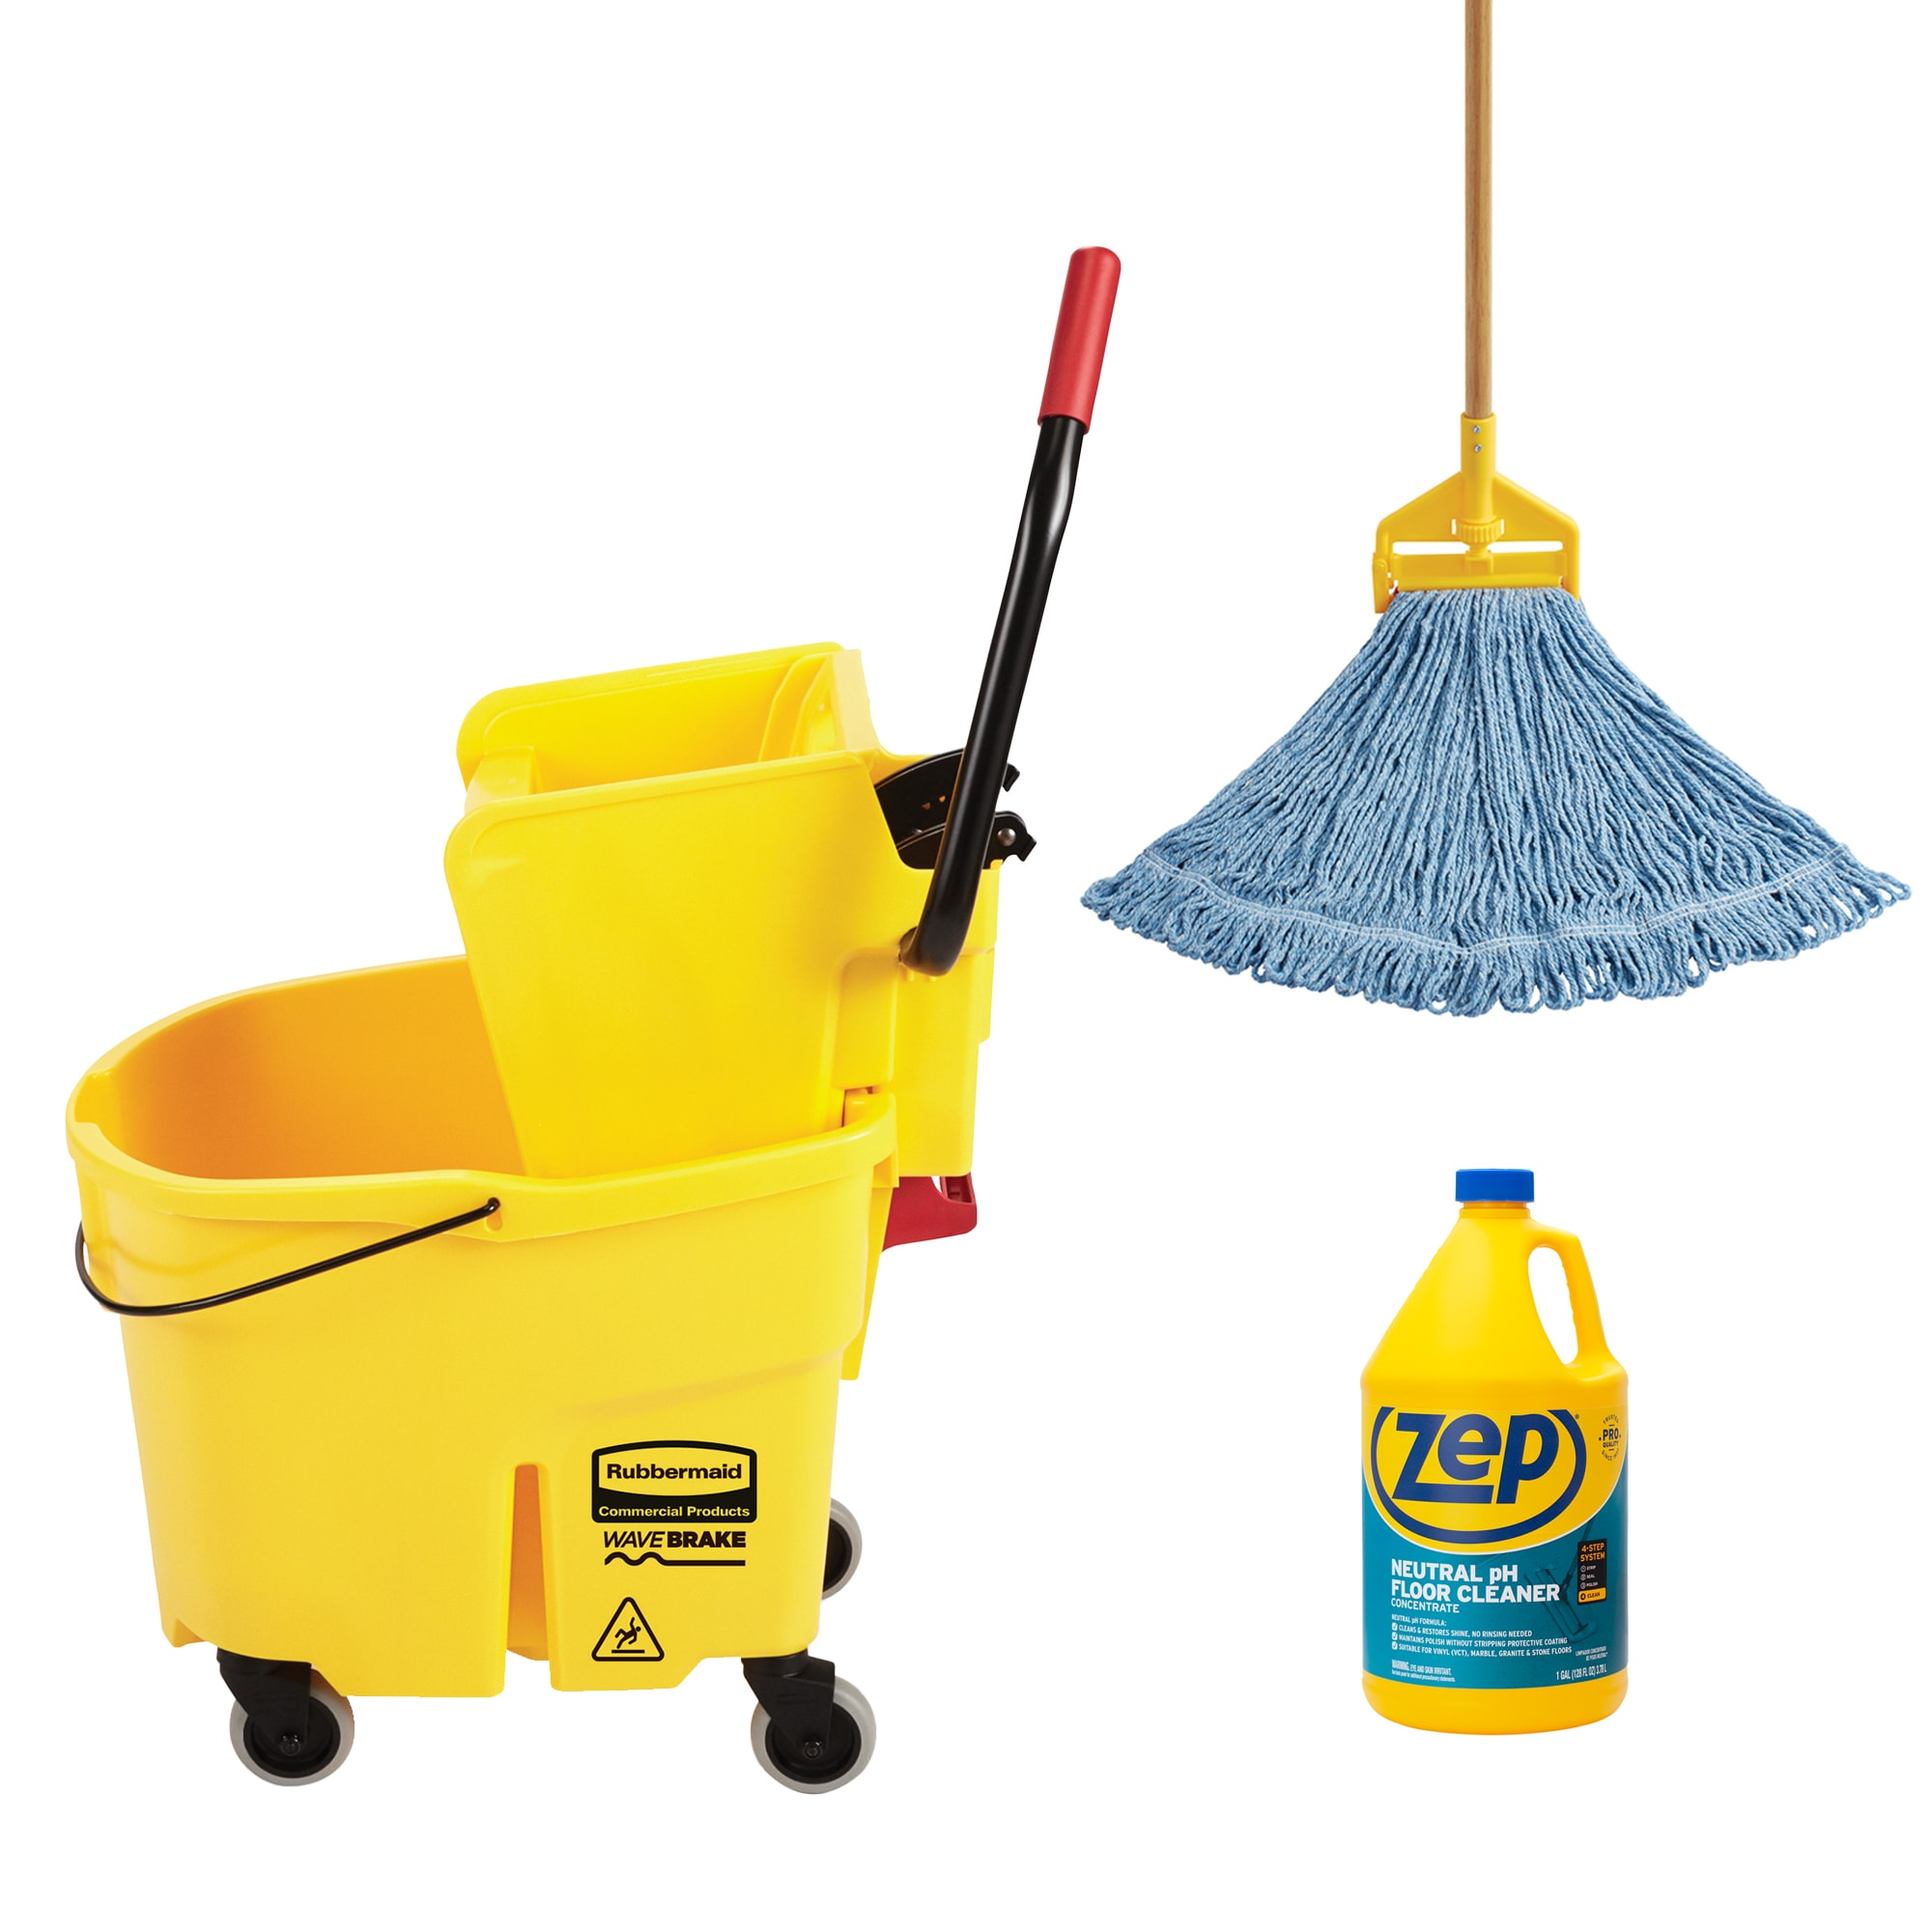 Rubbermaid Commercial Products Rubbermaid Commercial WaveBrake Mop Bucket  with Zep Floor Cleaner and Professional String Floor Mop (Bucket w/ Wheels